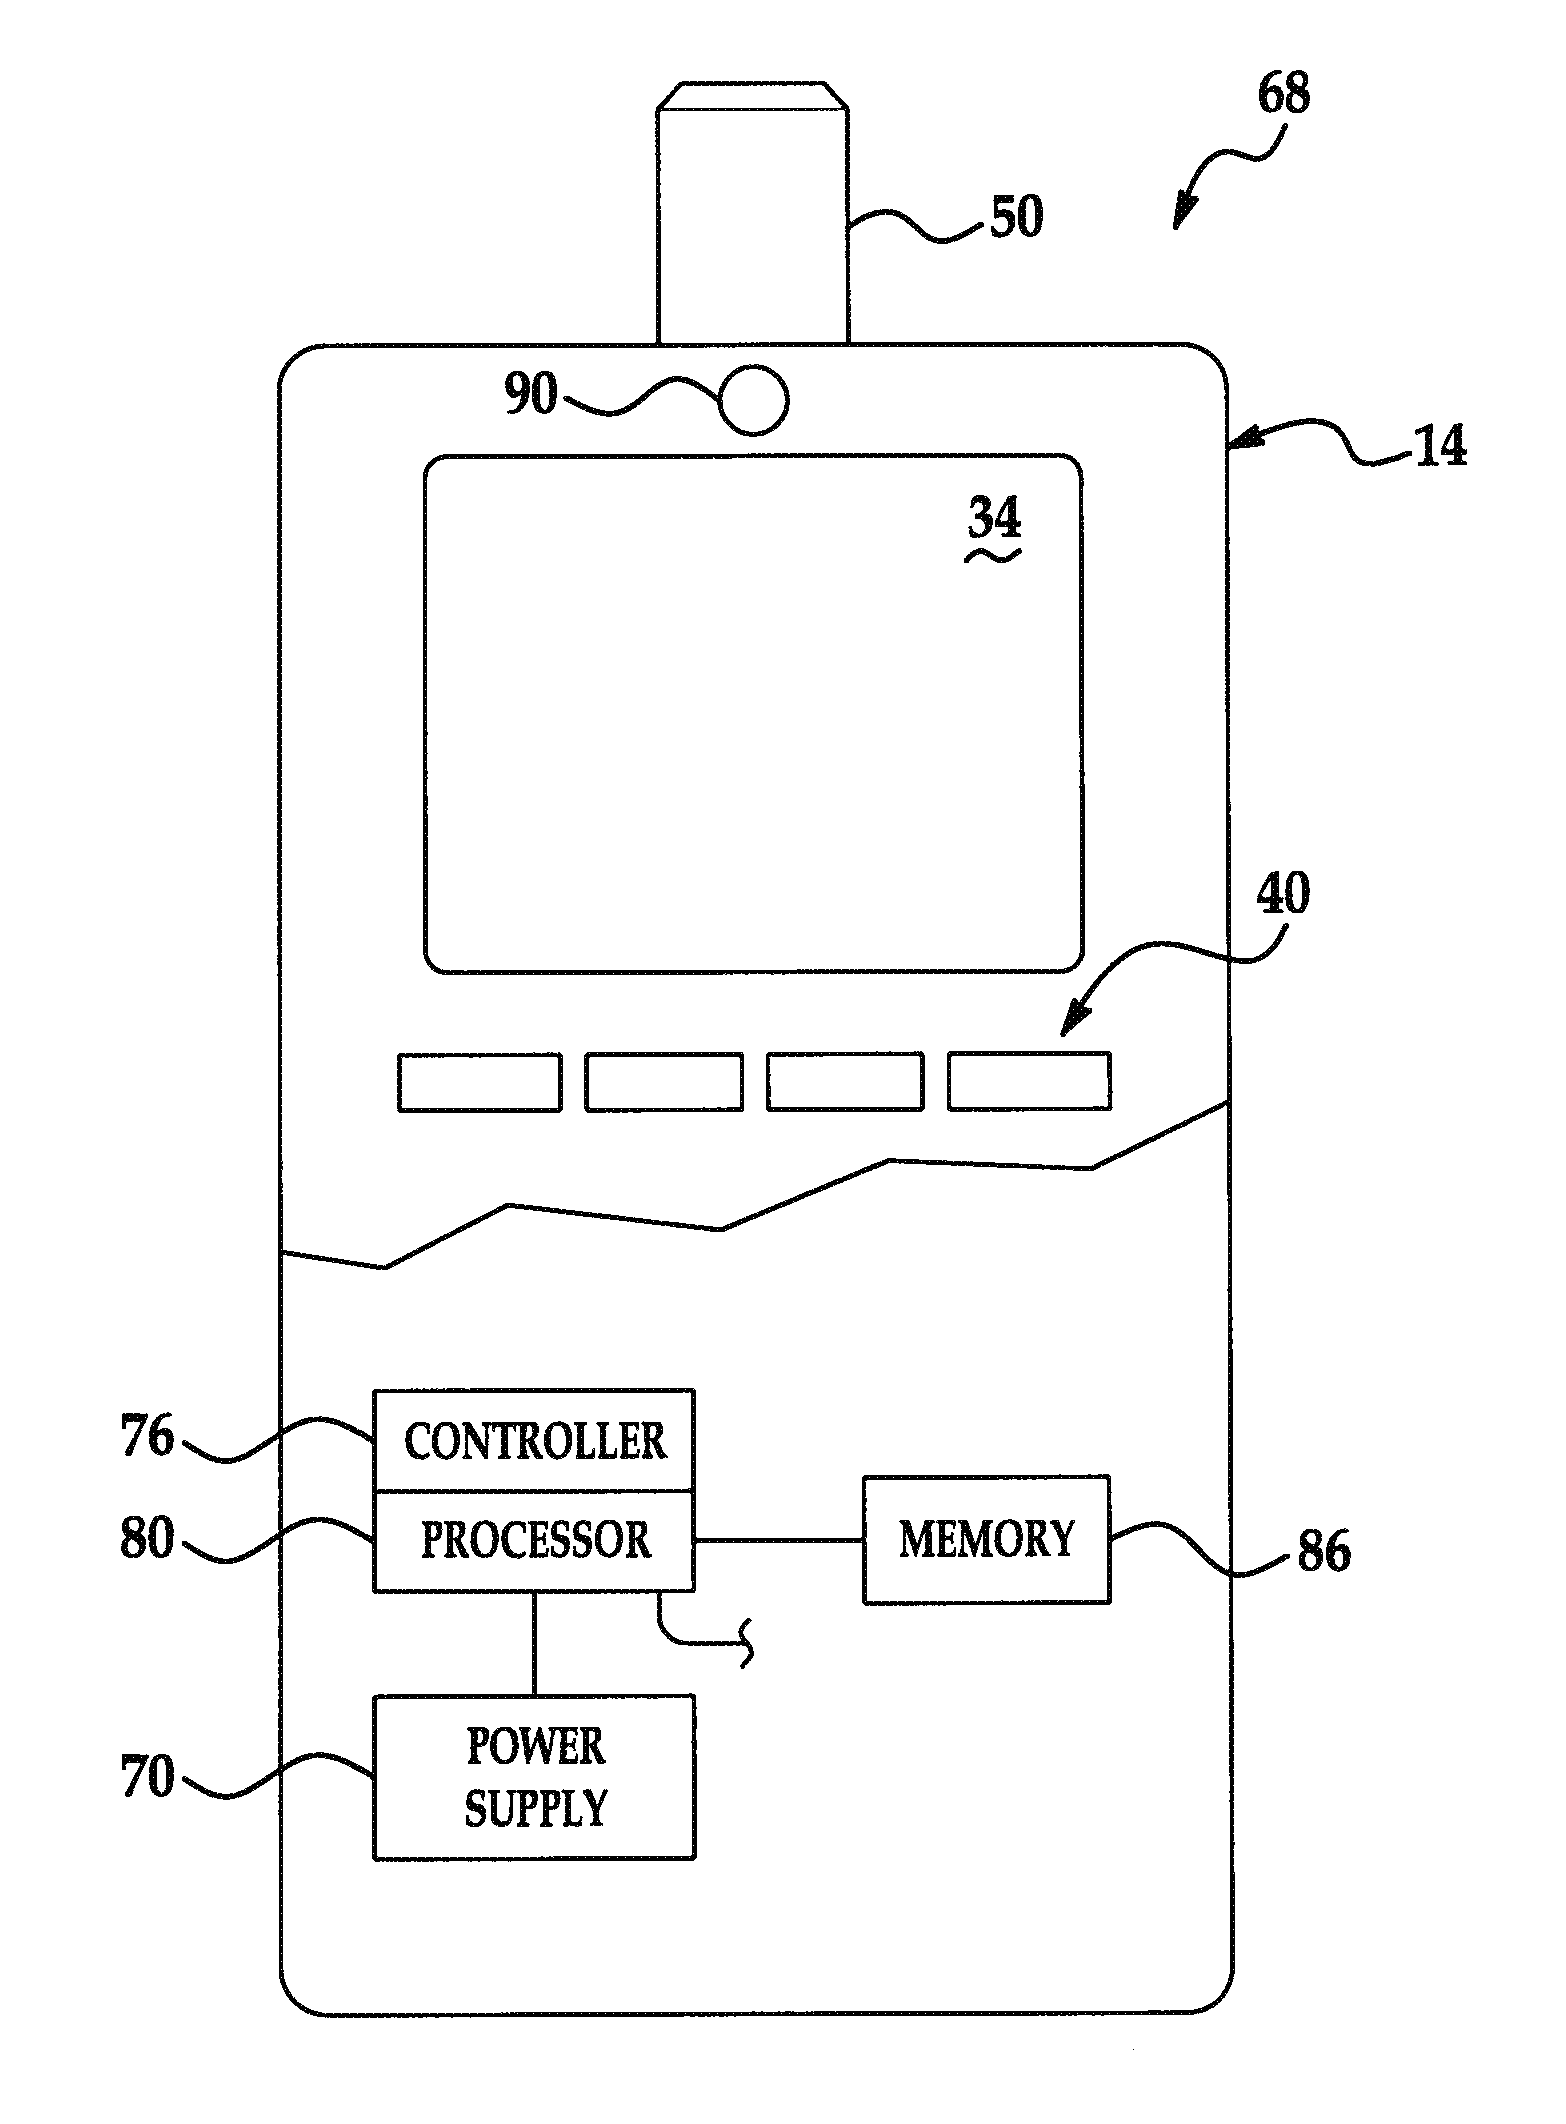 Universal tire pressure monitoring system tool and methods